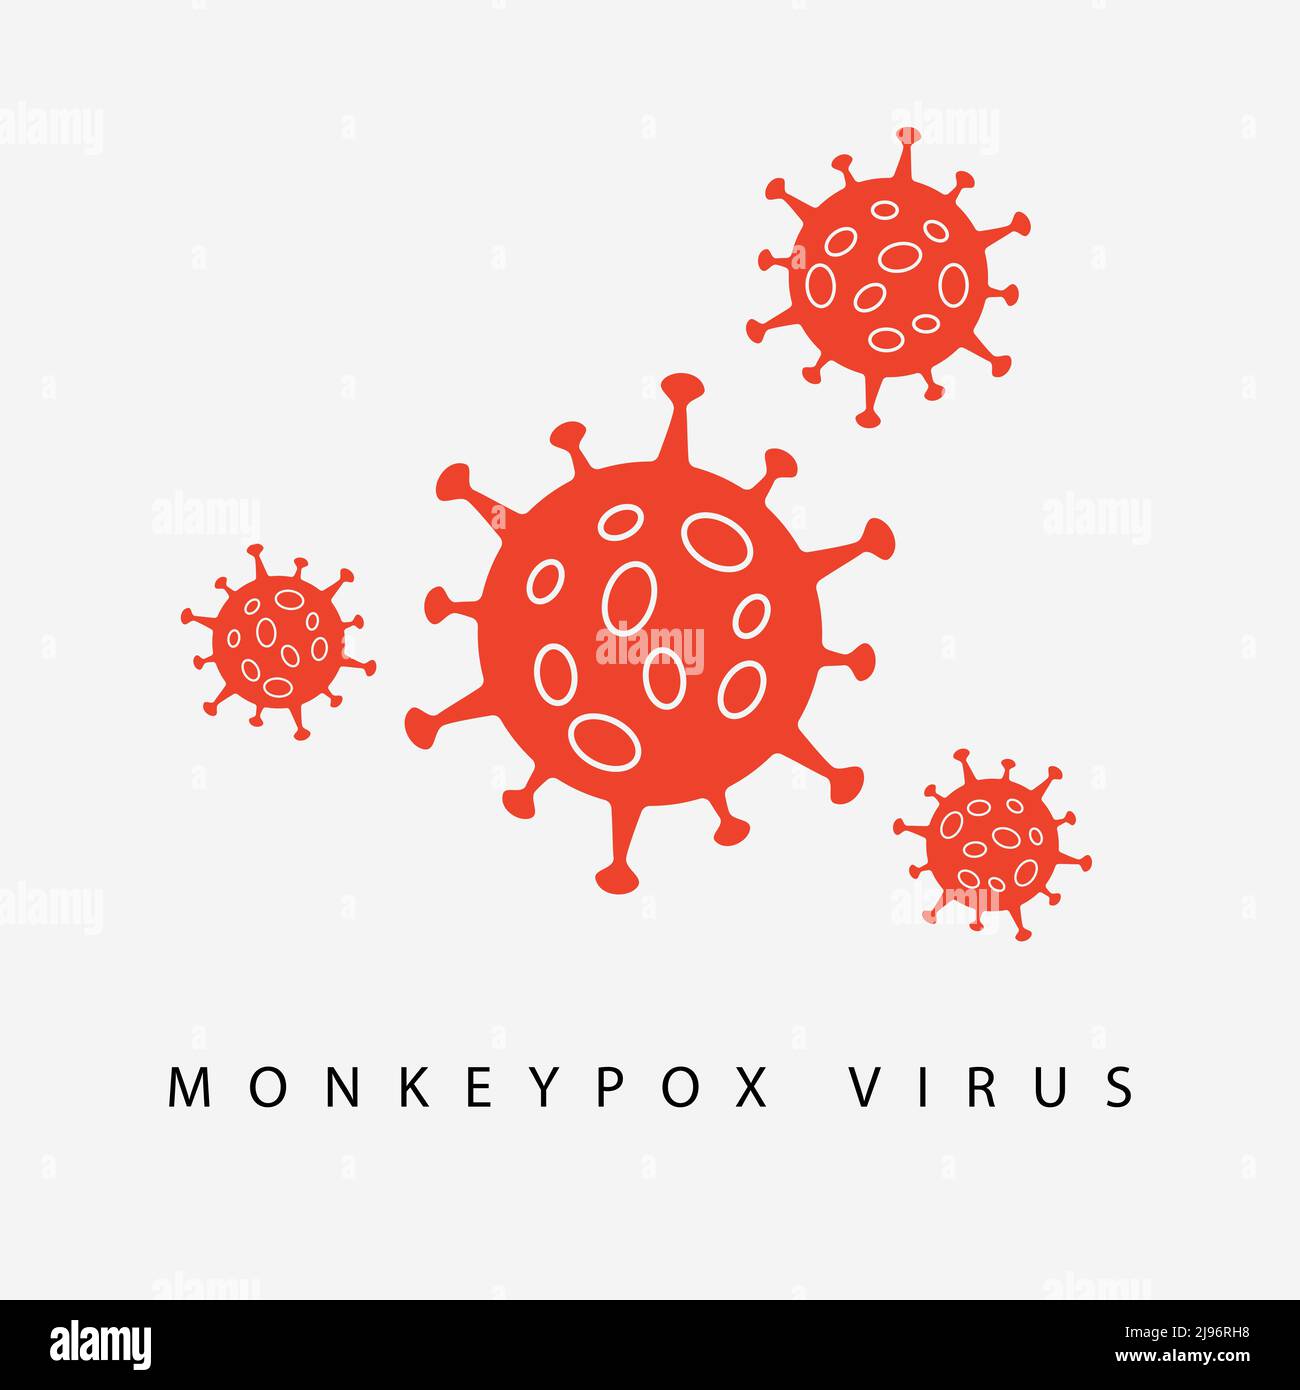 Virus icon sign monkeypox in red color. Pox virus concept. Vector clipart illustration Stock Vector